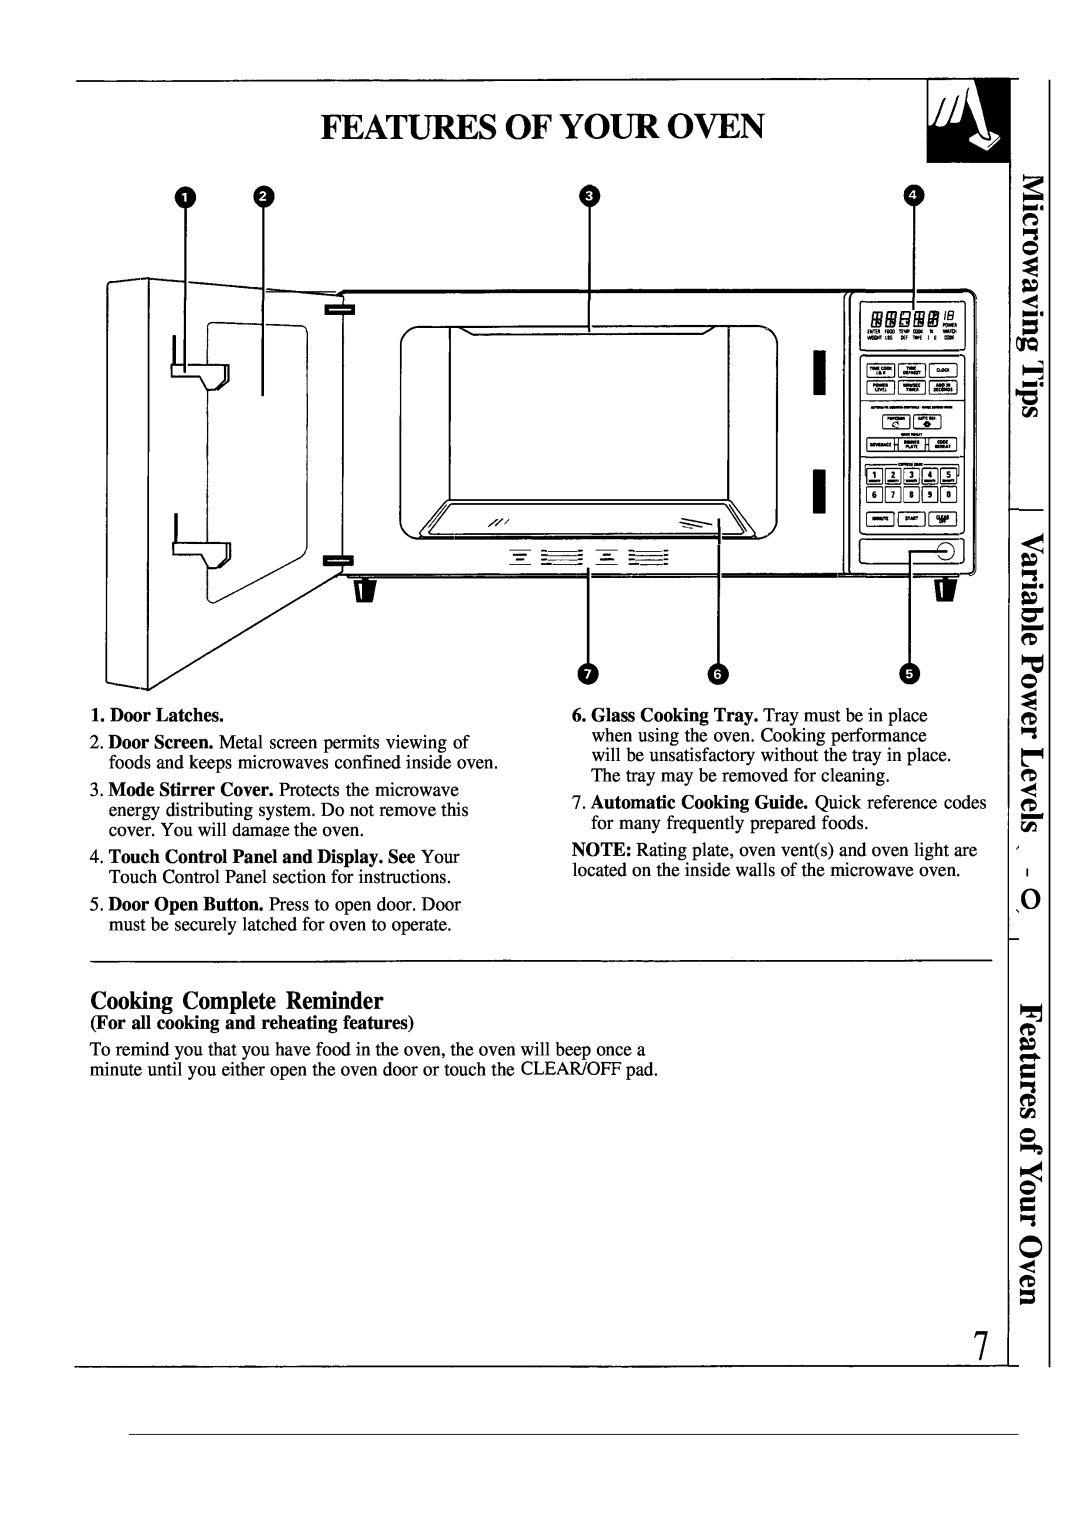 GE JEM23L operating instructions Cooking Complete Reminder, Door Latches, For all cooking and reheating features 